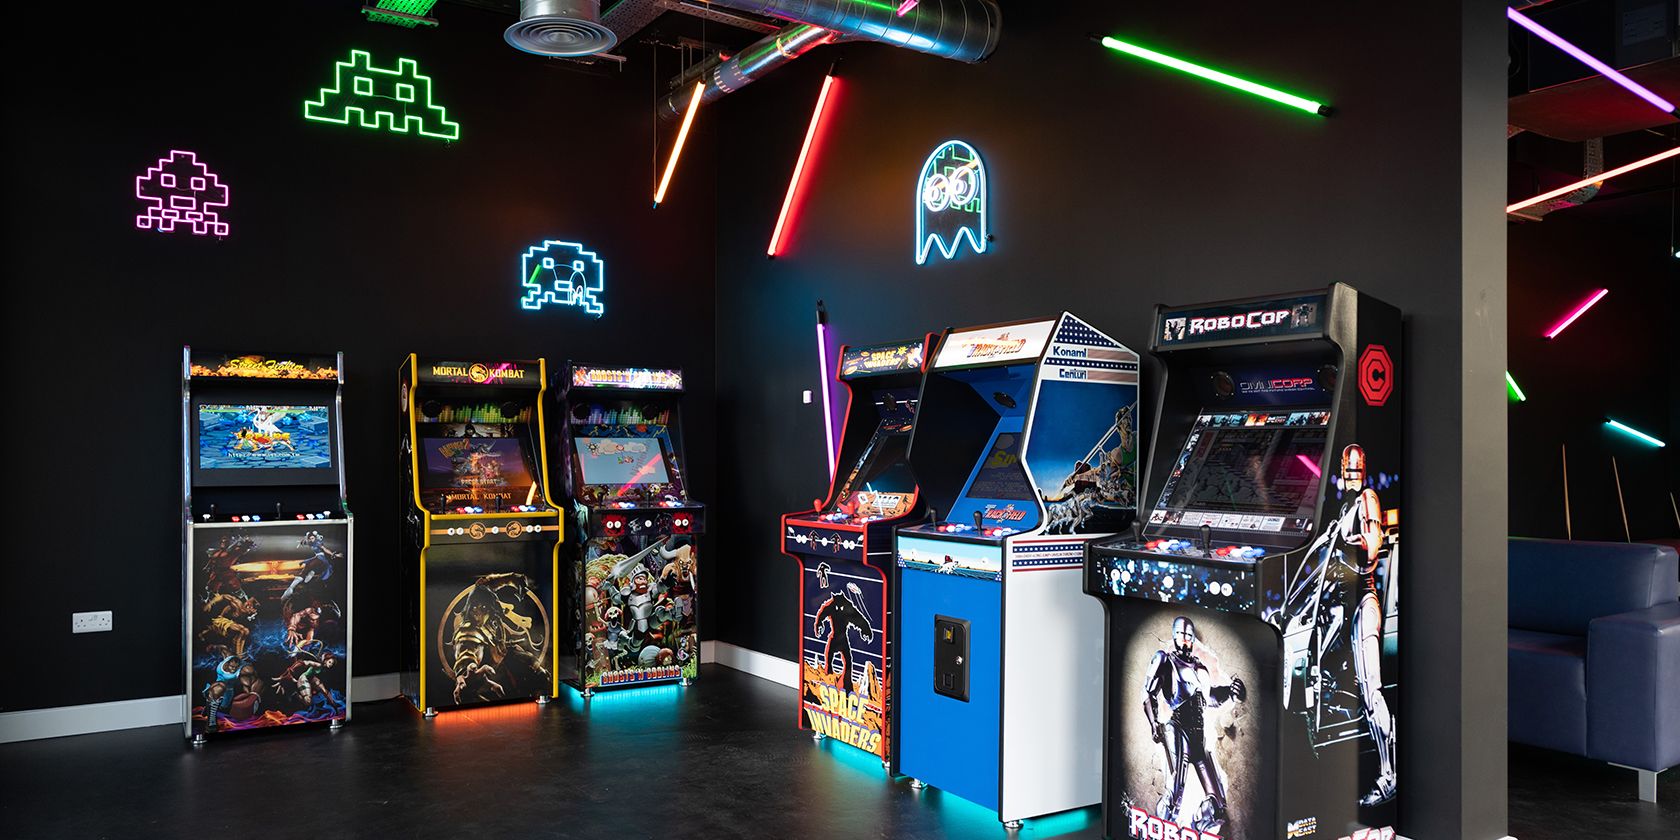 Arcade machines in a room